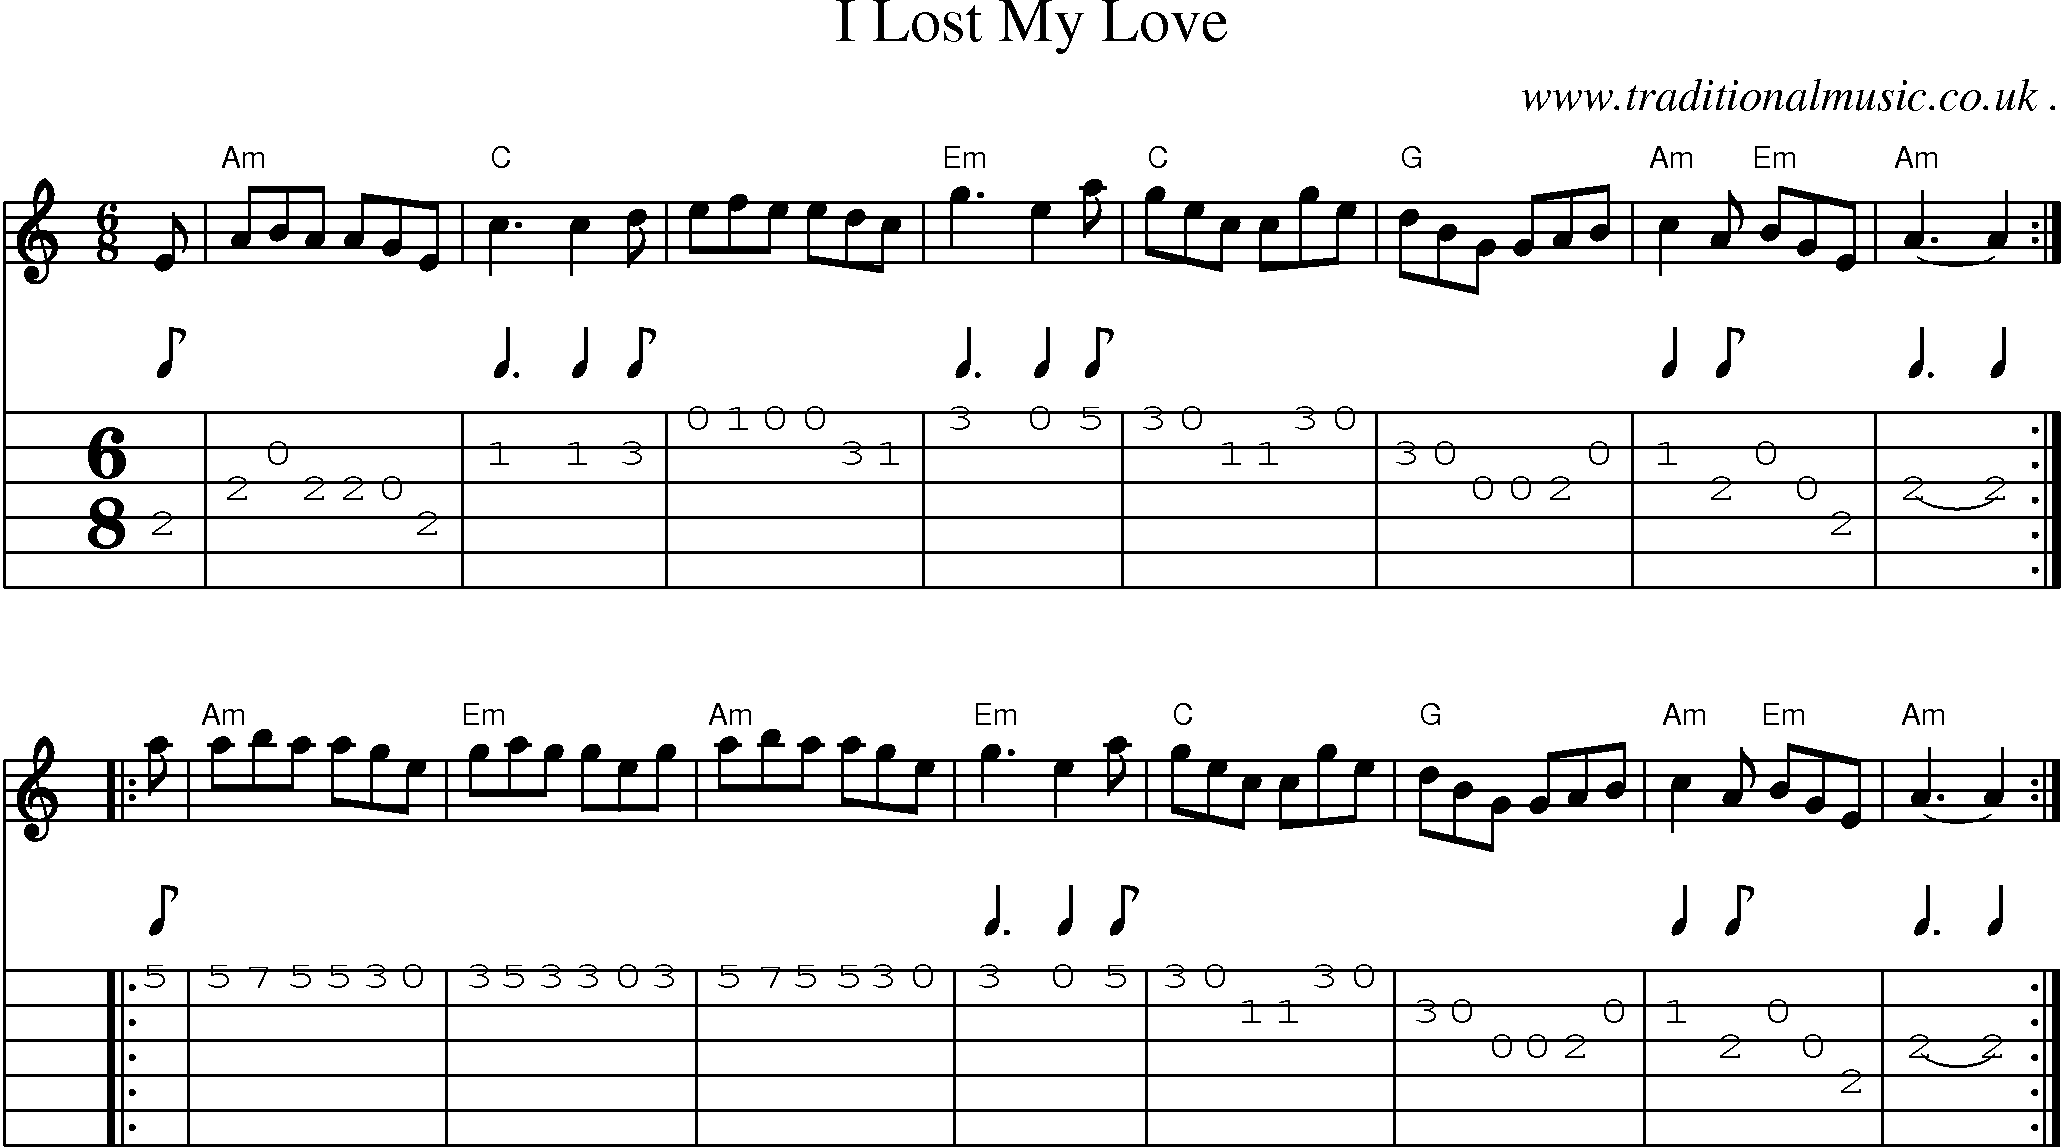 Sheet-music  score, Chords and Guitar Tabs for I Lost My Love